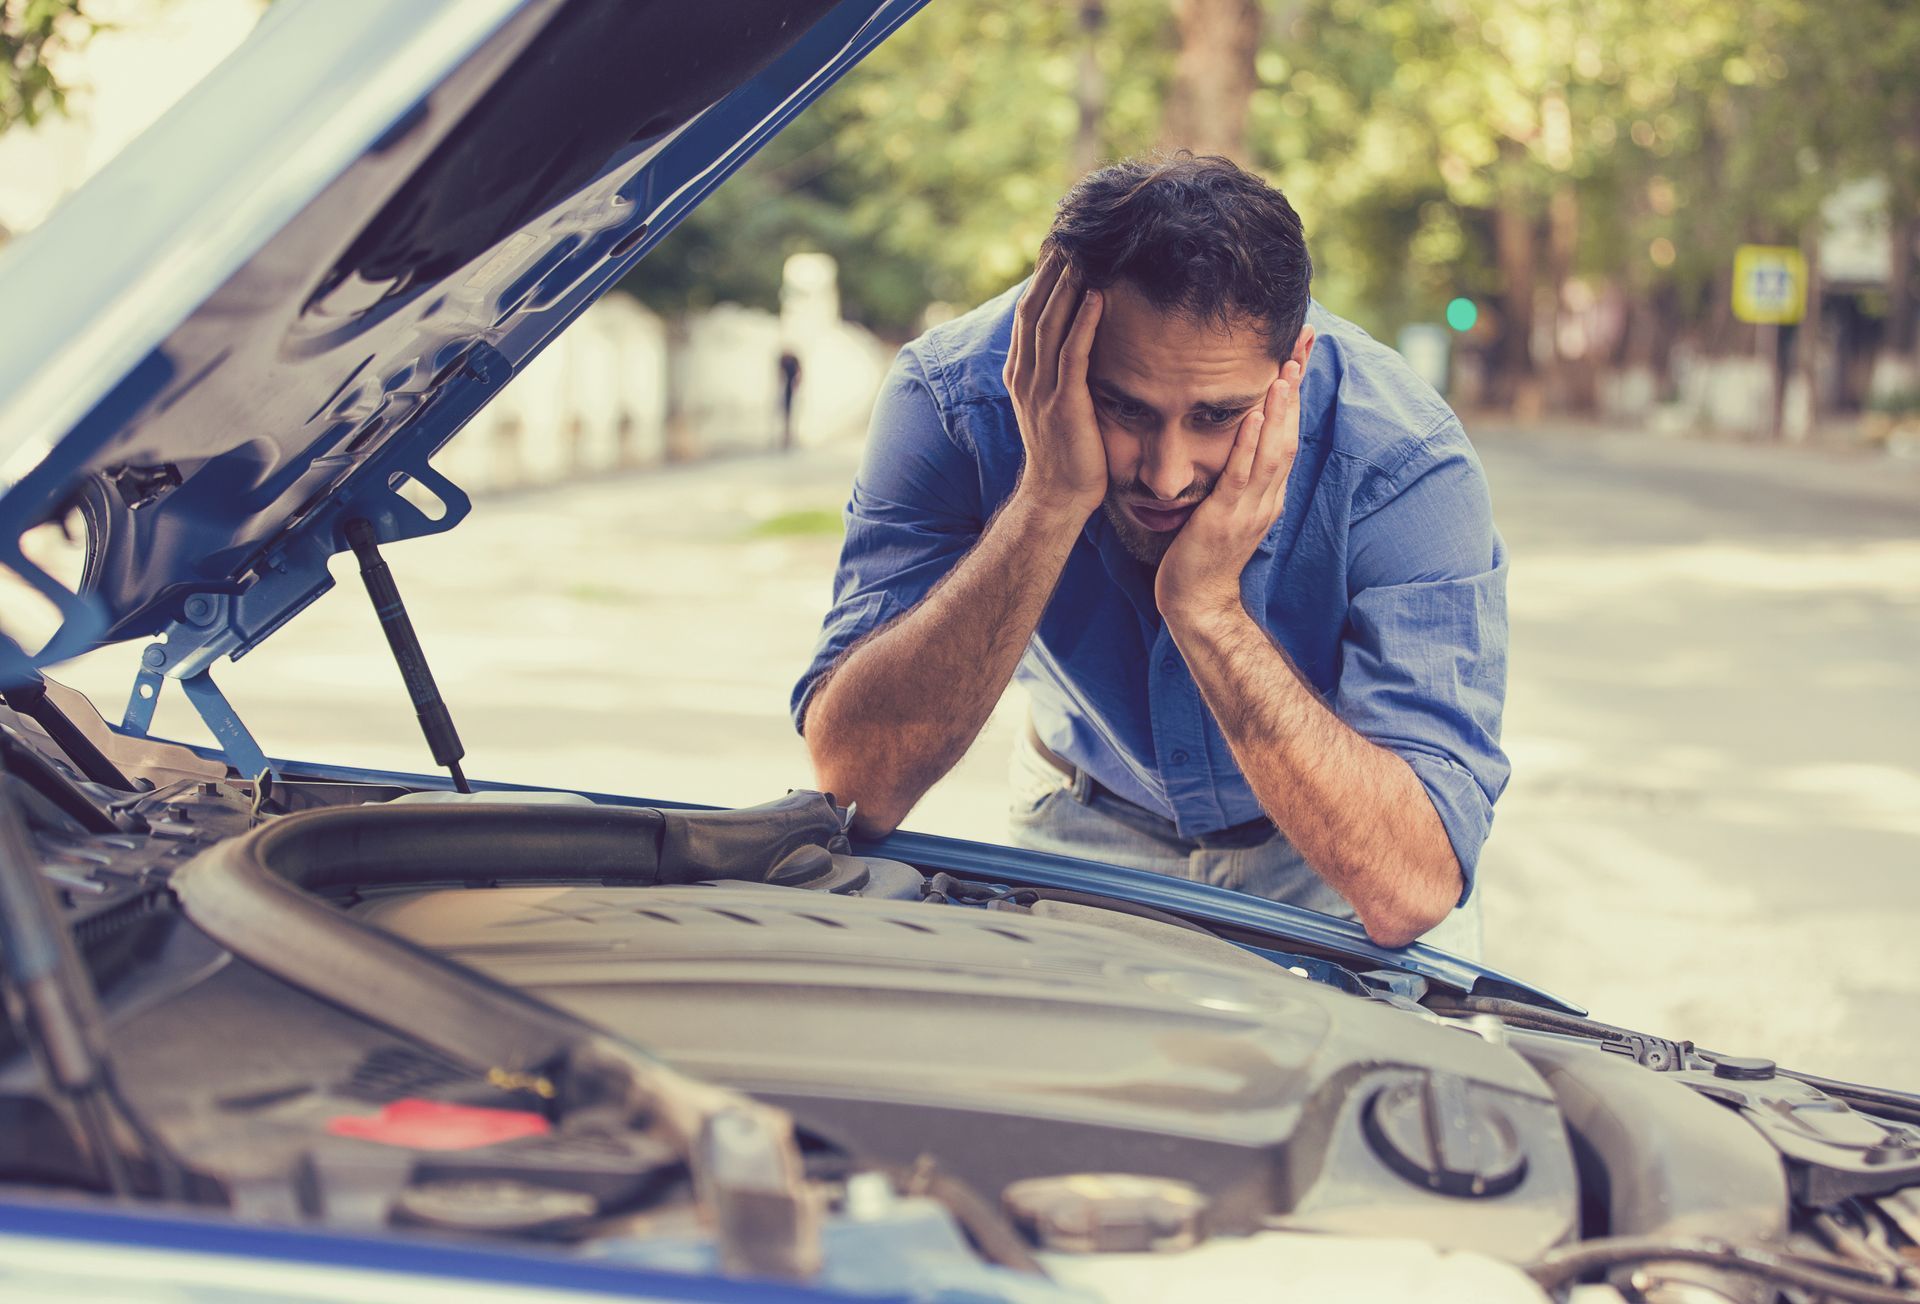 7 Unusual Car Problems & What They Mean | BG Automotive